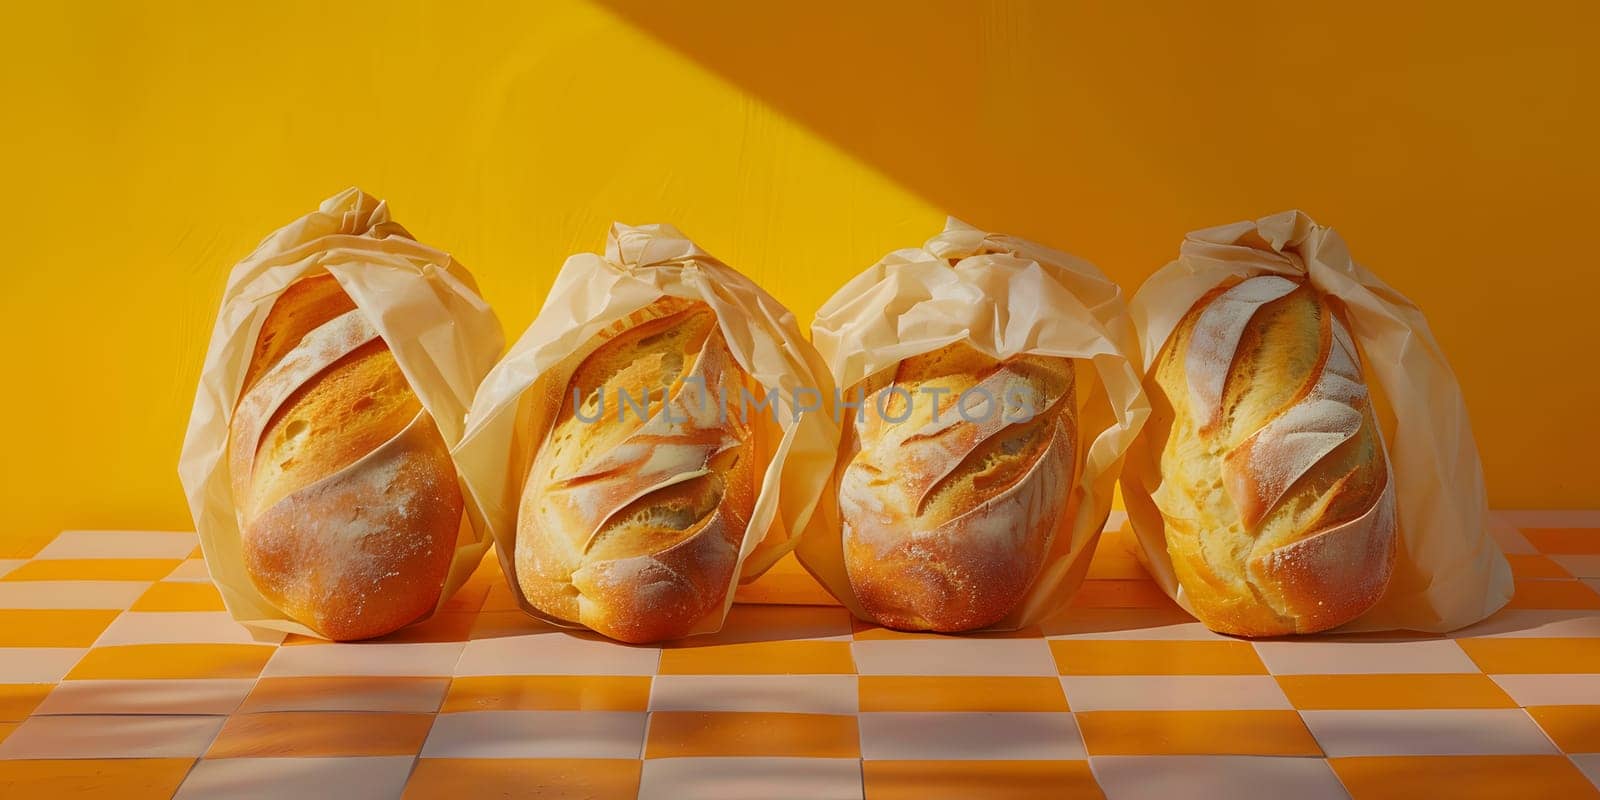 Four loaves of bread displayed on a checkered tablecloth by Nadtochiy